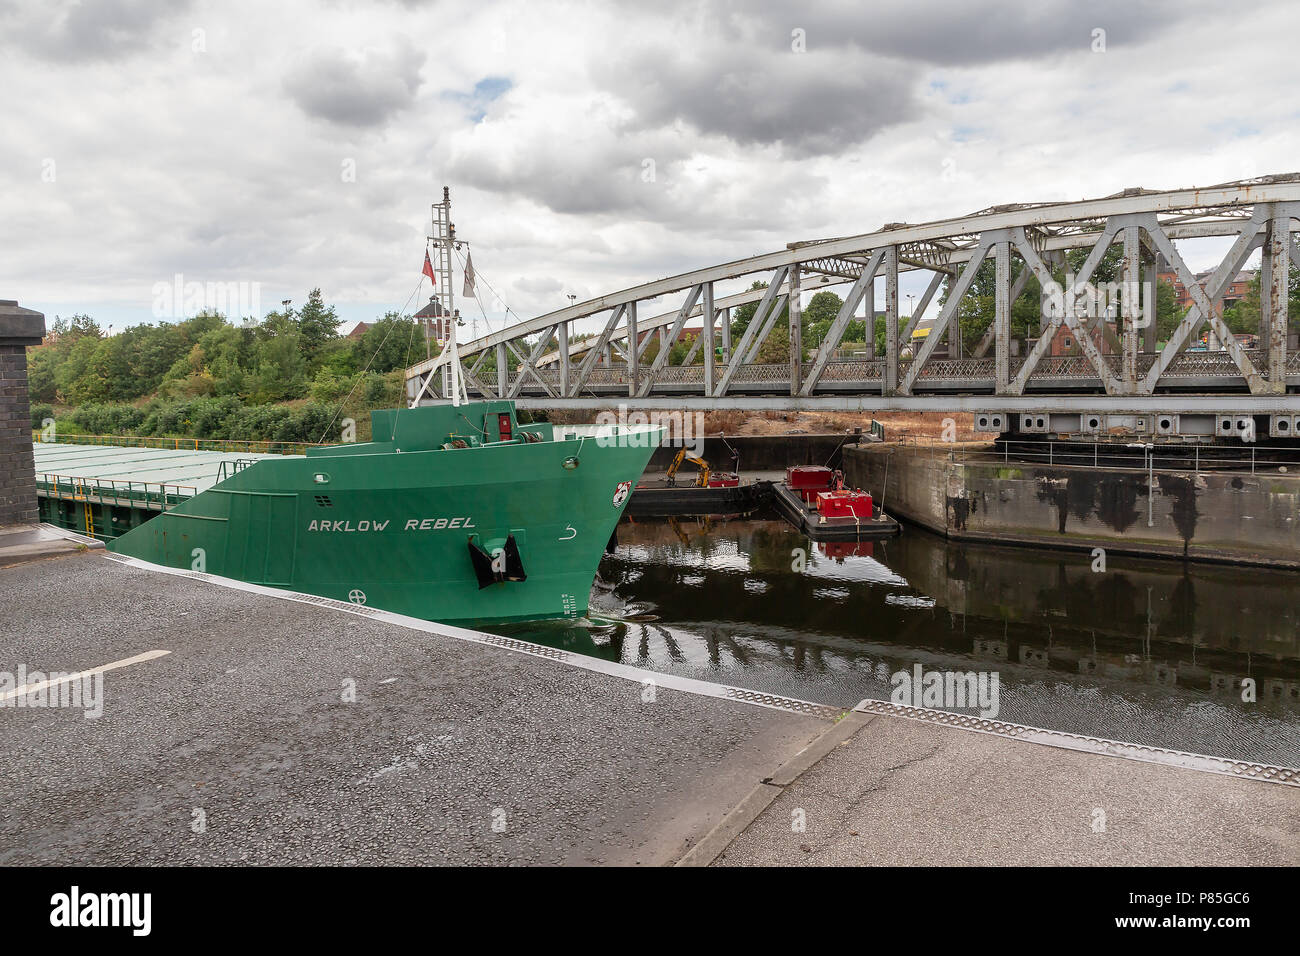 Arklow Rebel, a 13 year old General Cargo Ship from Ireland travels along the Manchester Ship Canal, through the open Swing Bridge at Stockton Heath Stock Photo